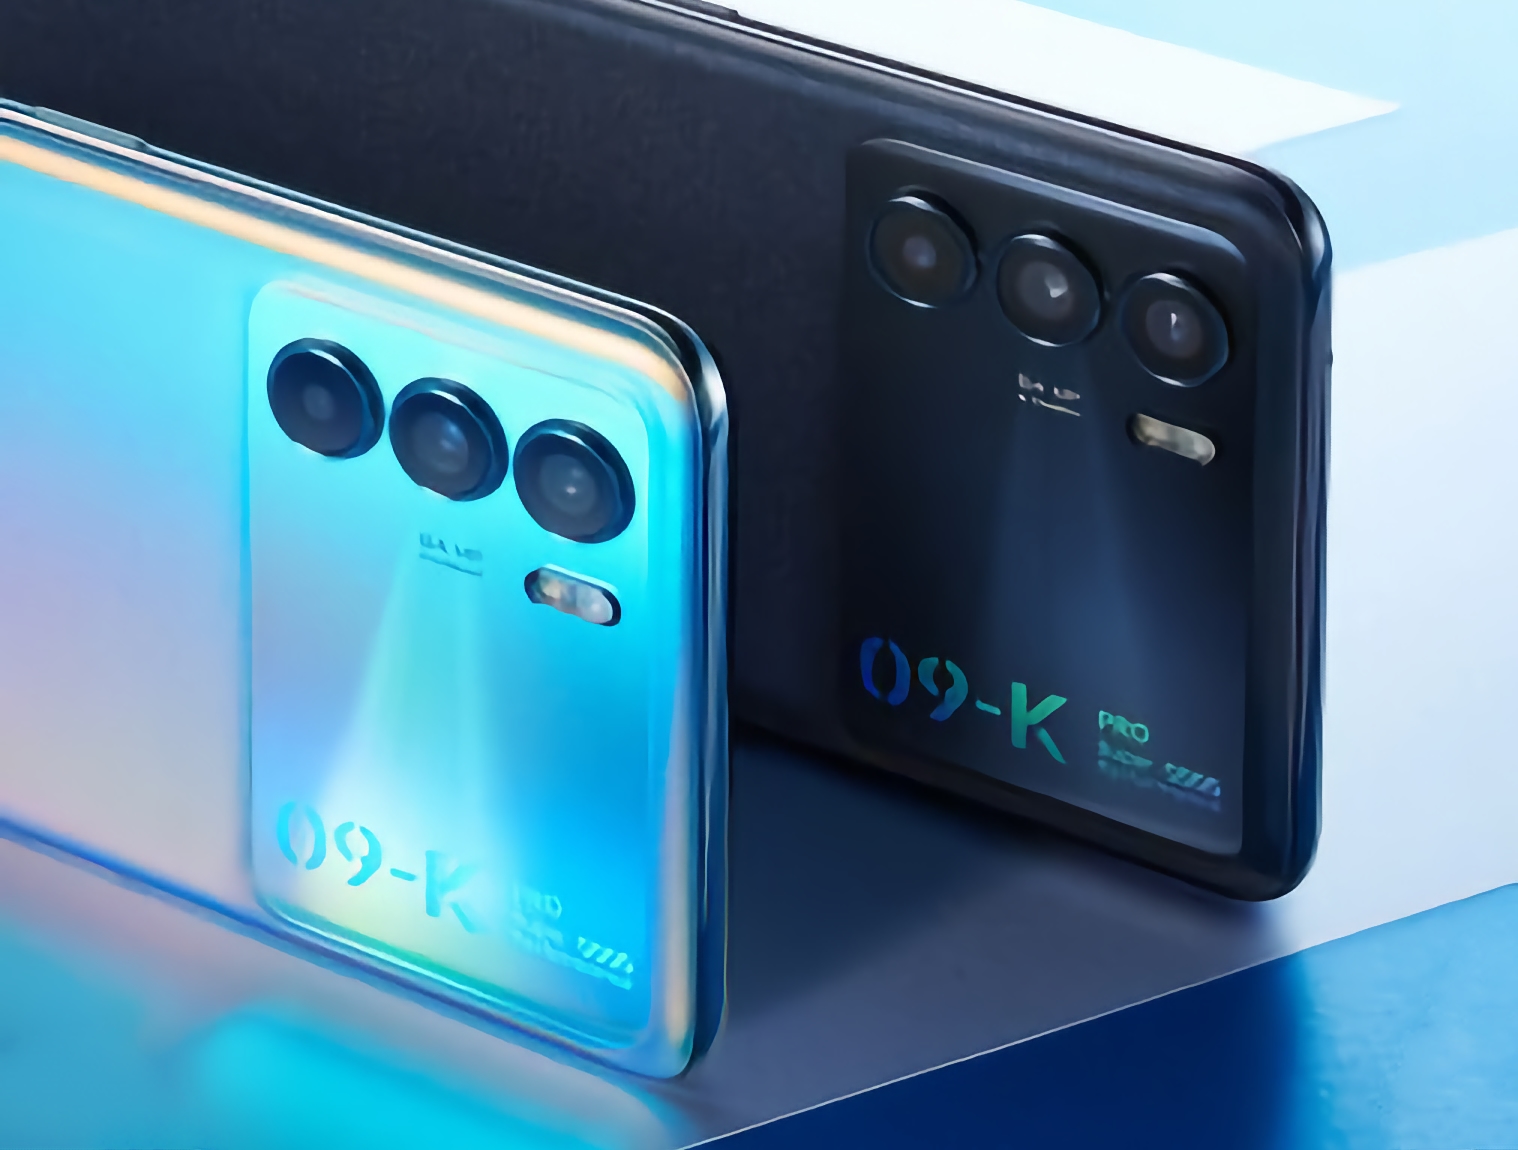 It's official: OPPO K9 Pro with MediaTek Dimensity 1200 chip and triple 64 MP camera to be unveiled on September 26